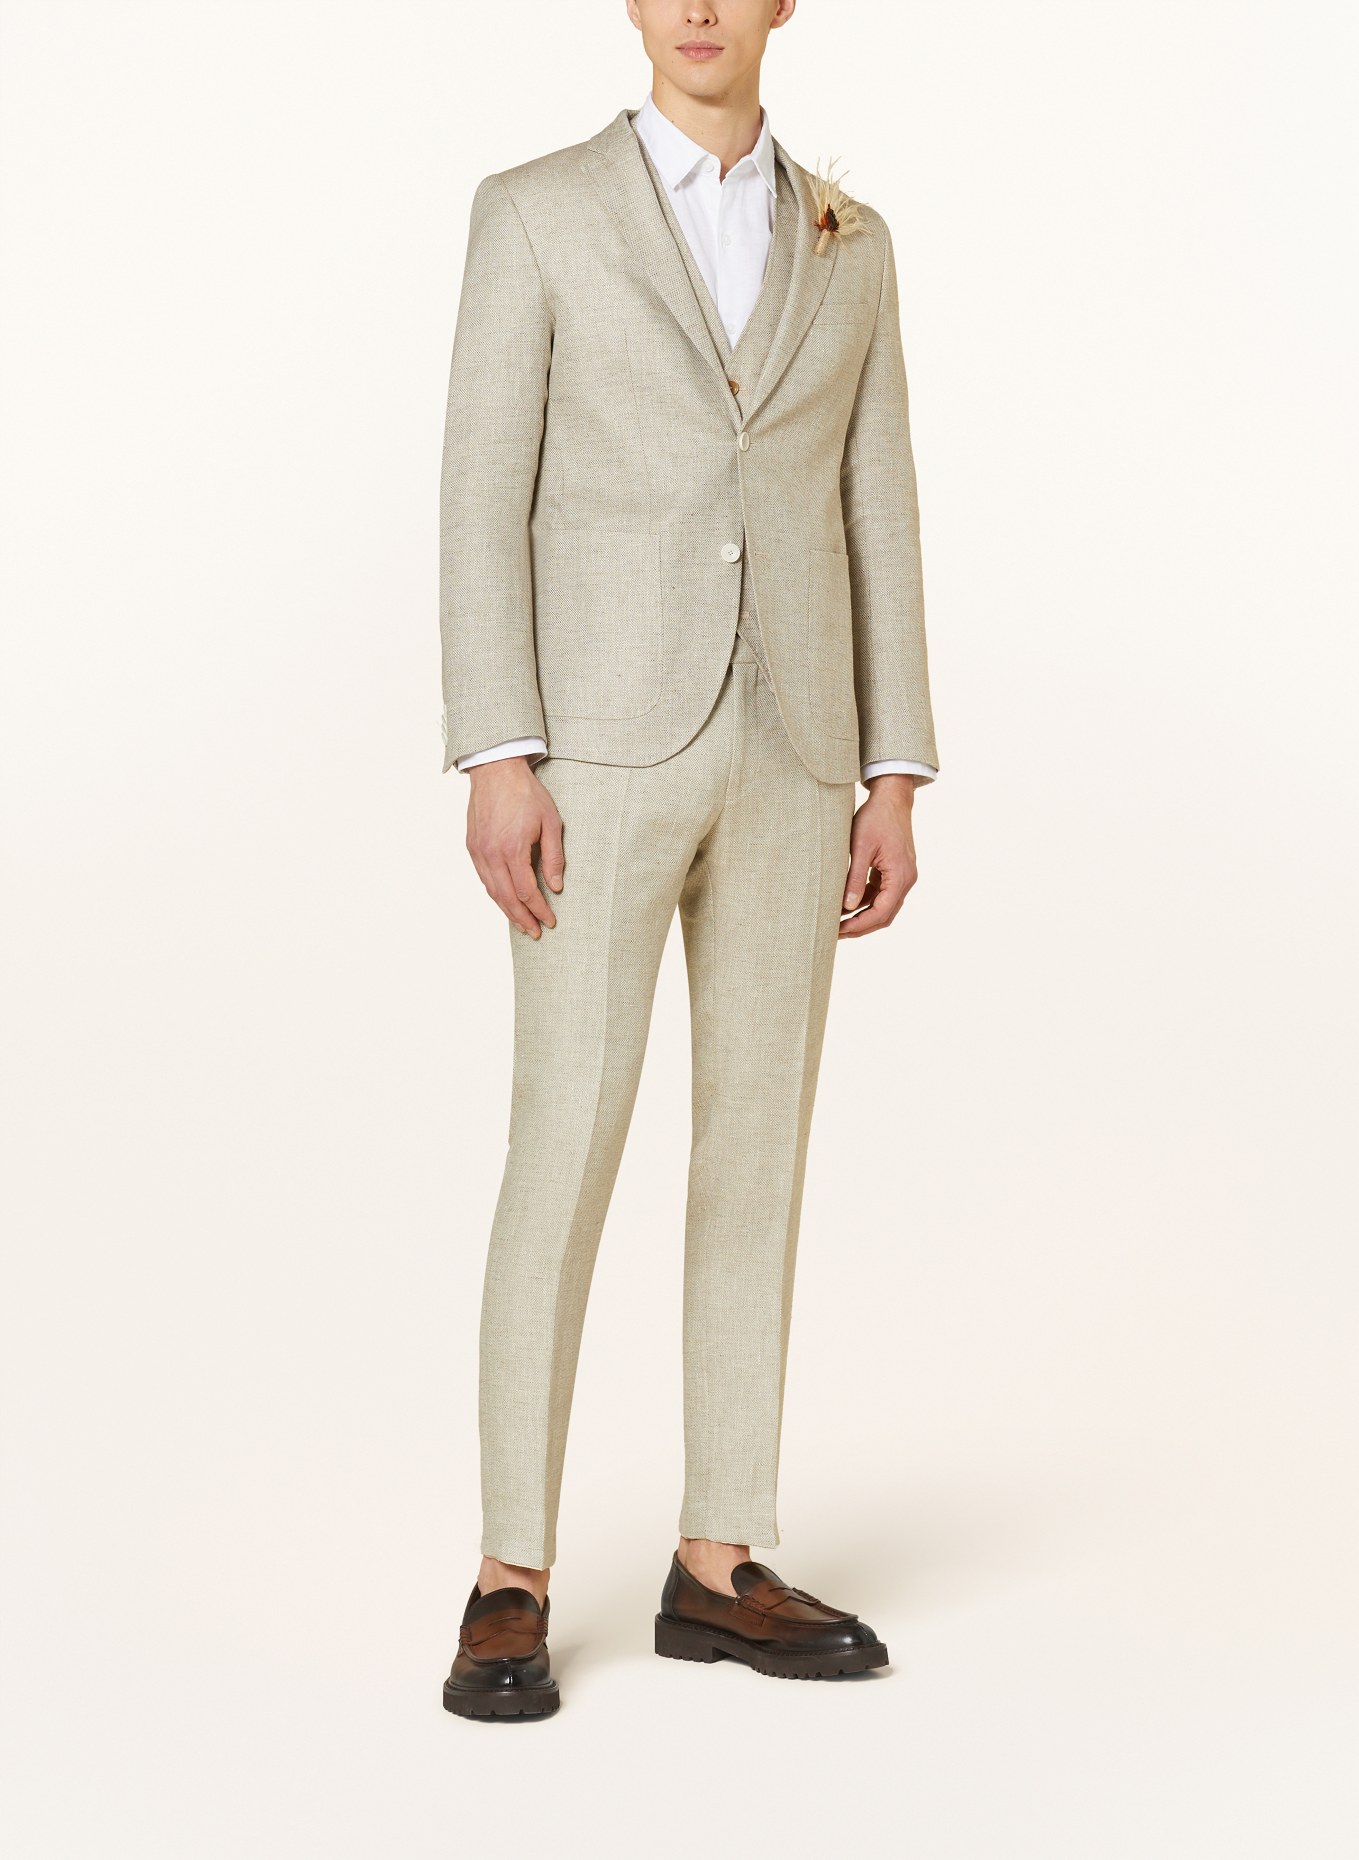 CG - CLUB of GENTS Suit jacket SG PETERSON slim fit with linen, Color: 21 HELLBEIGE (Image 2)